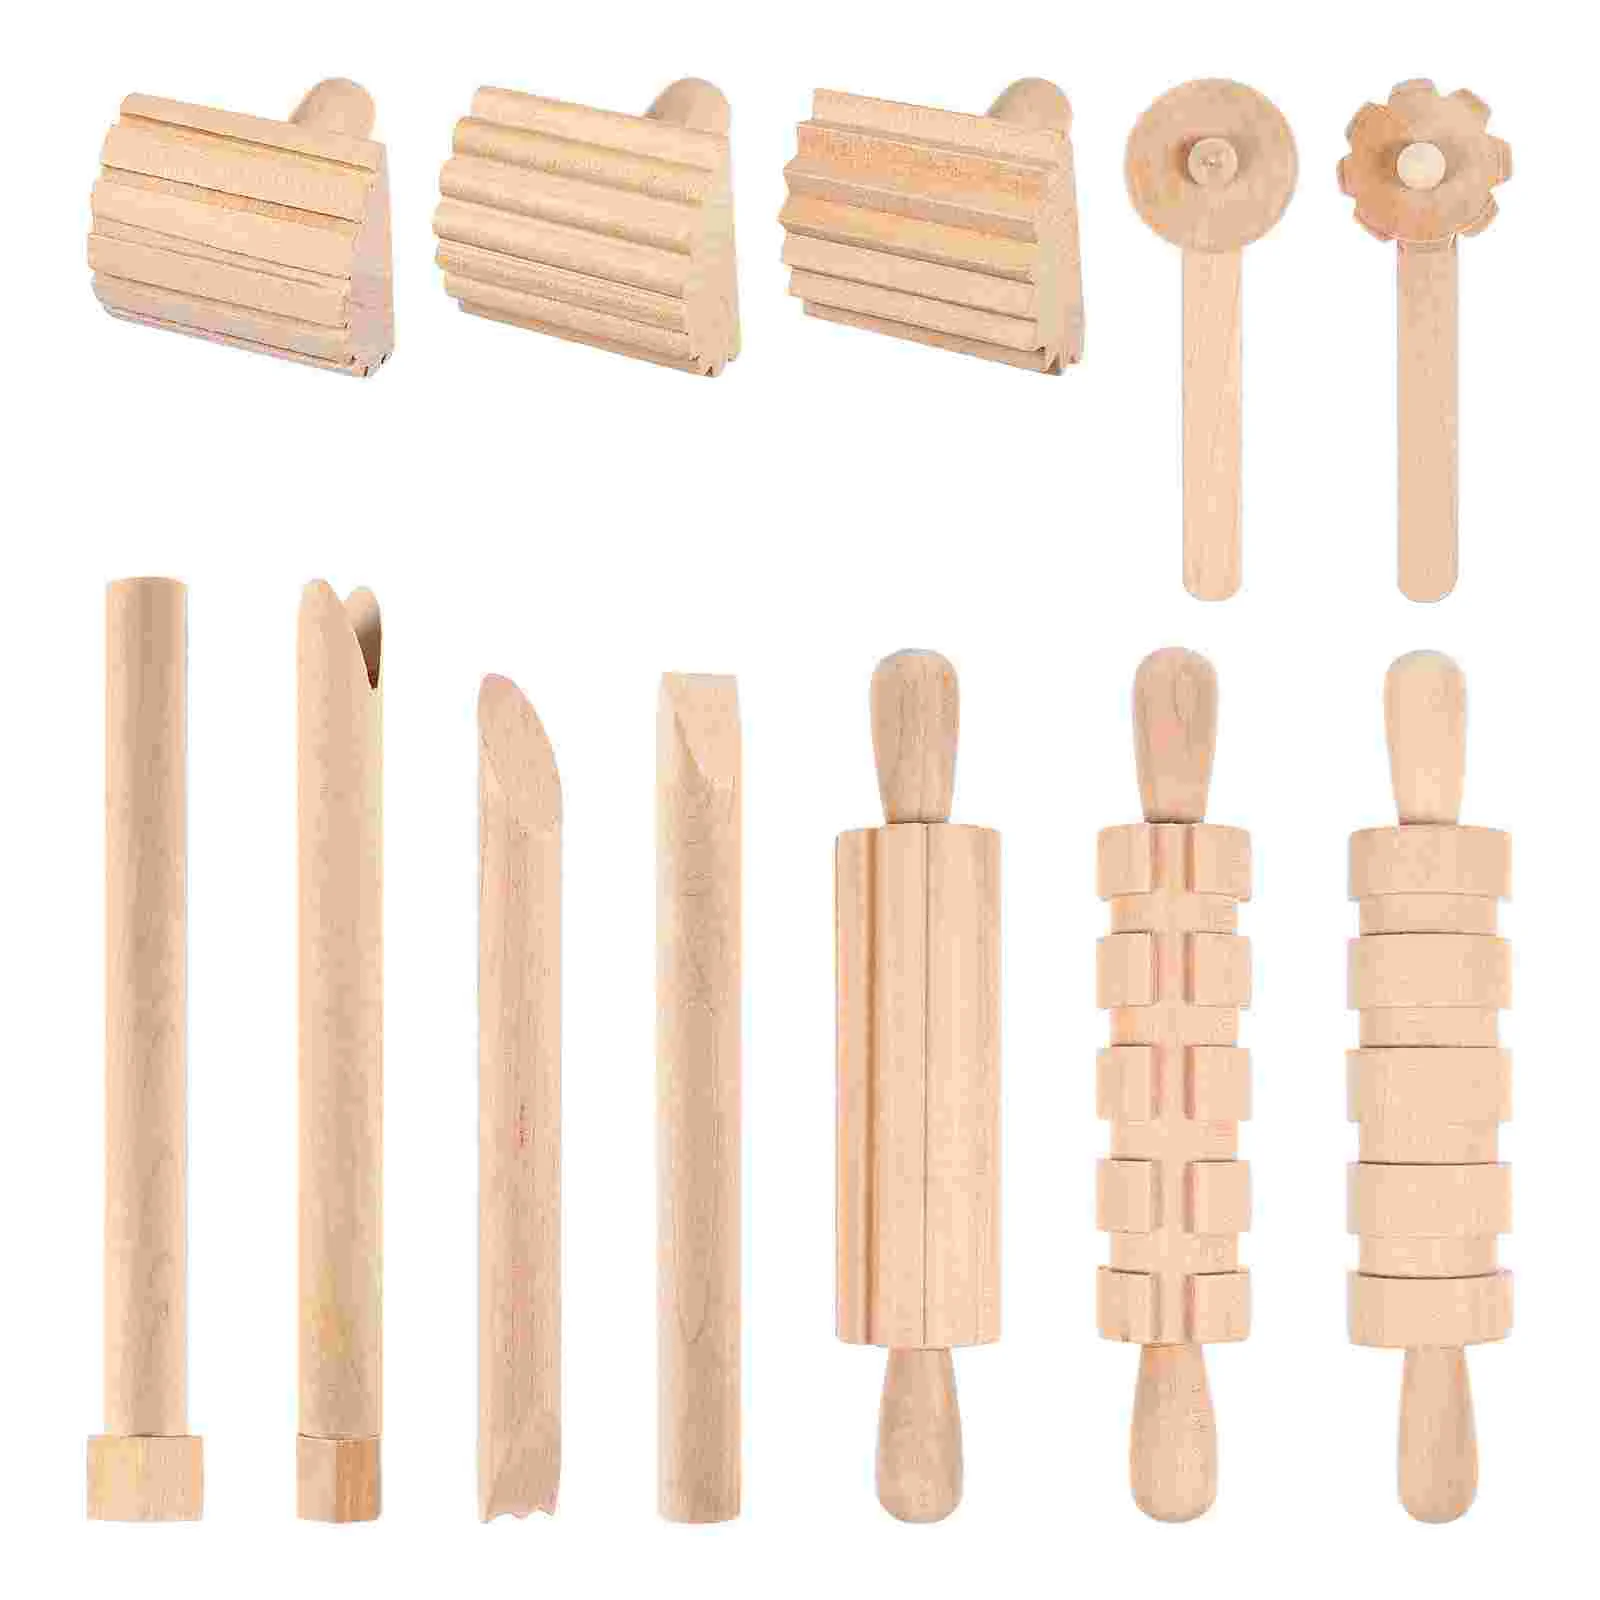 

Tools Clay Wooden Pottery Tool Dough Kids Sculpting Modeling Set Wood Shaping Molding Rollers Carving Stamp Accessories Roller